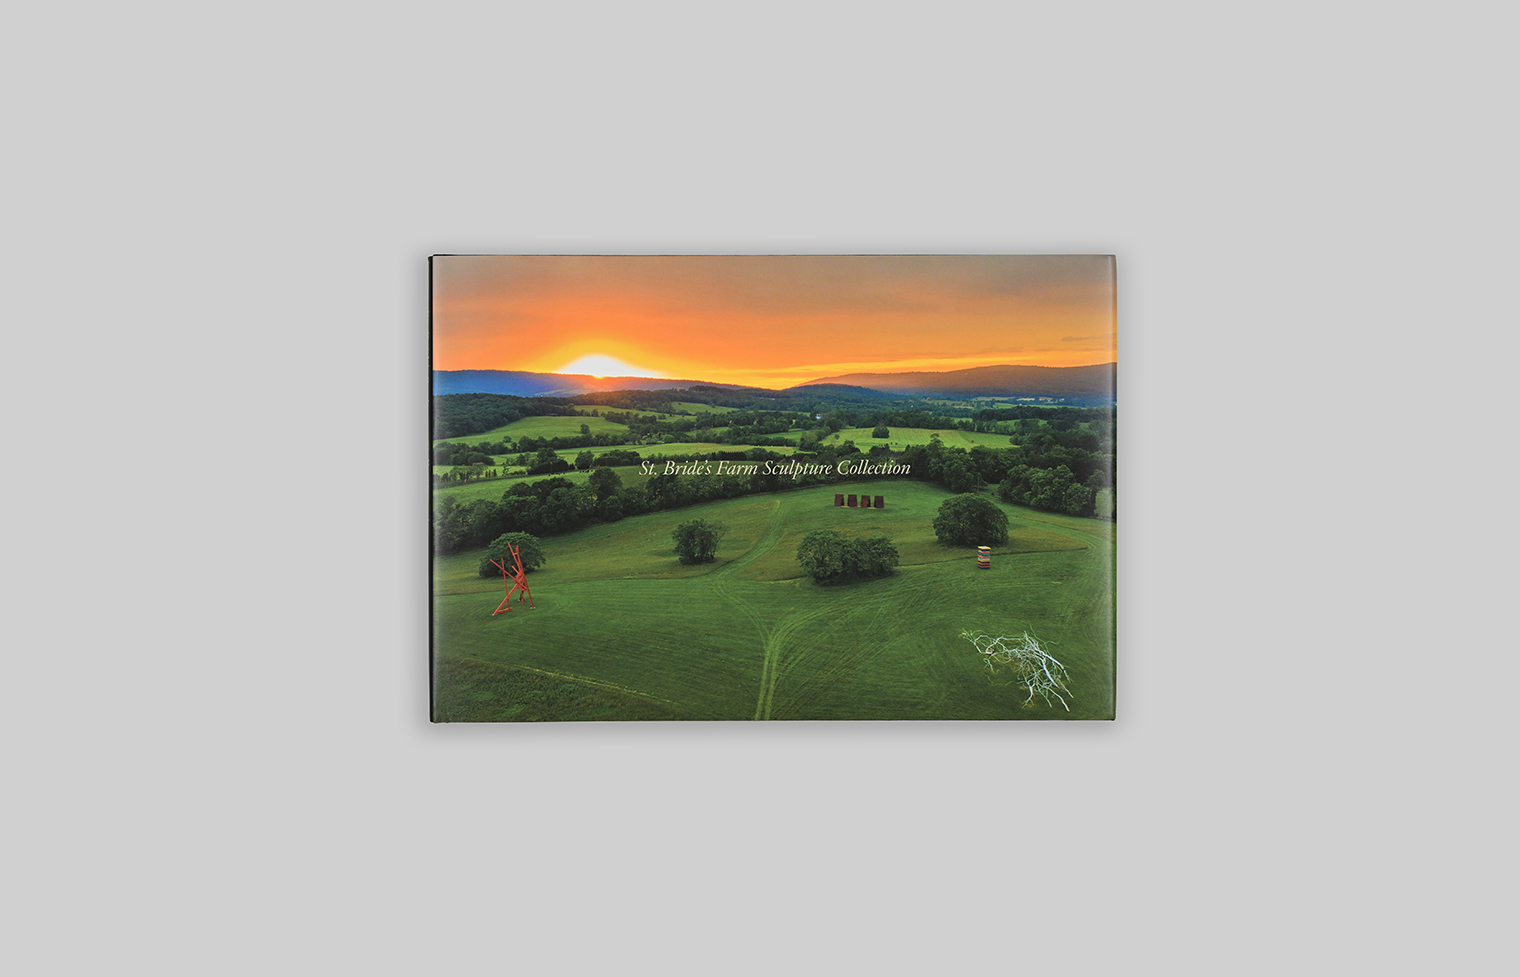 Cover features an aerial view of the countryside at sunset, with four sculptures in the foreground.